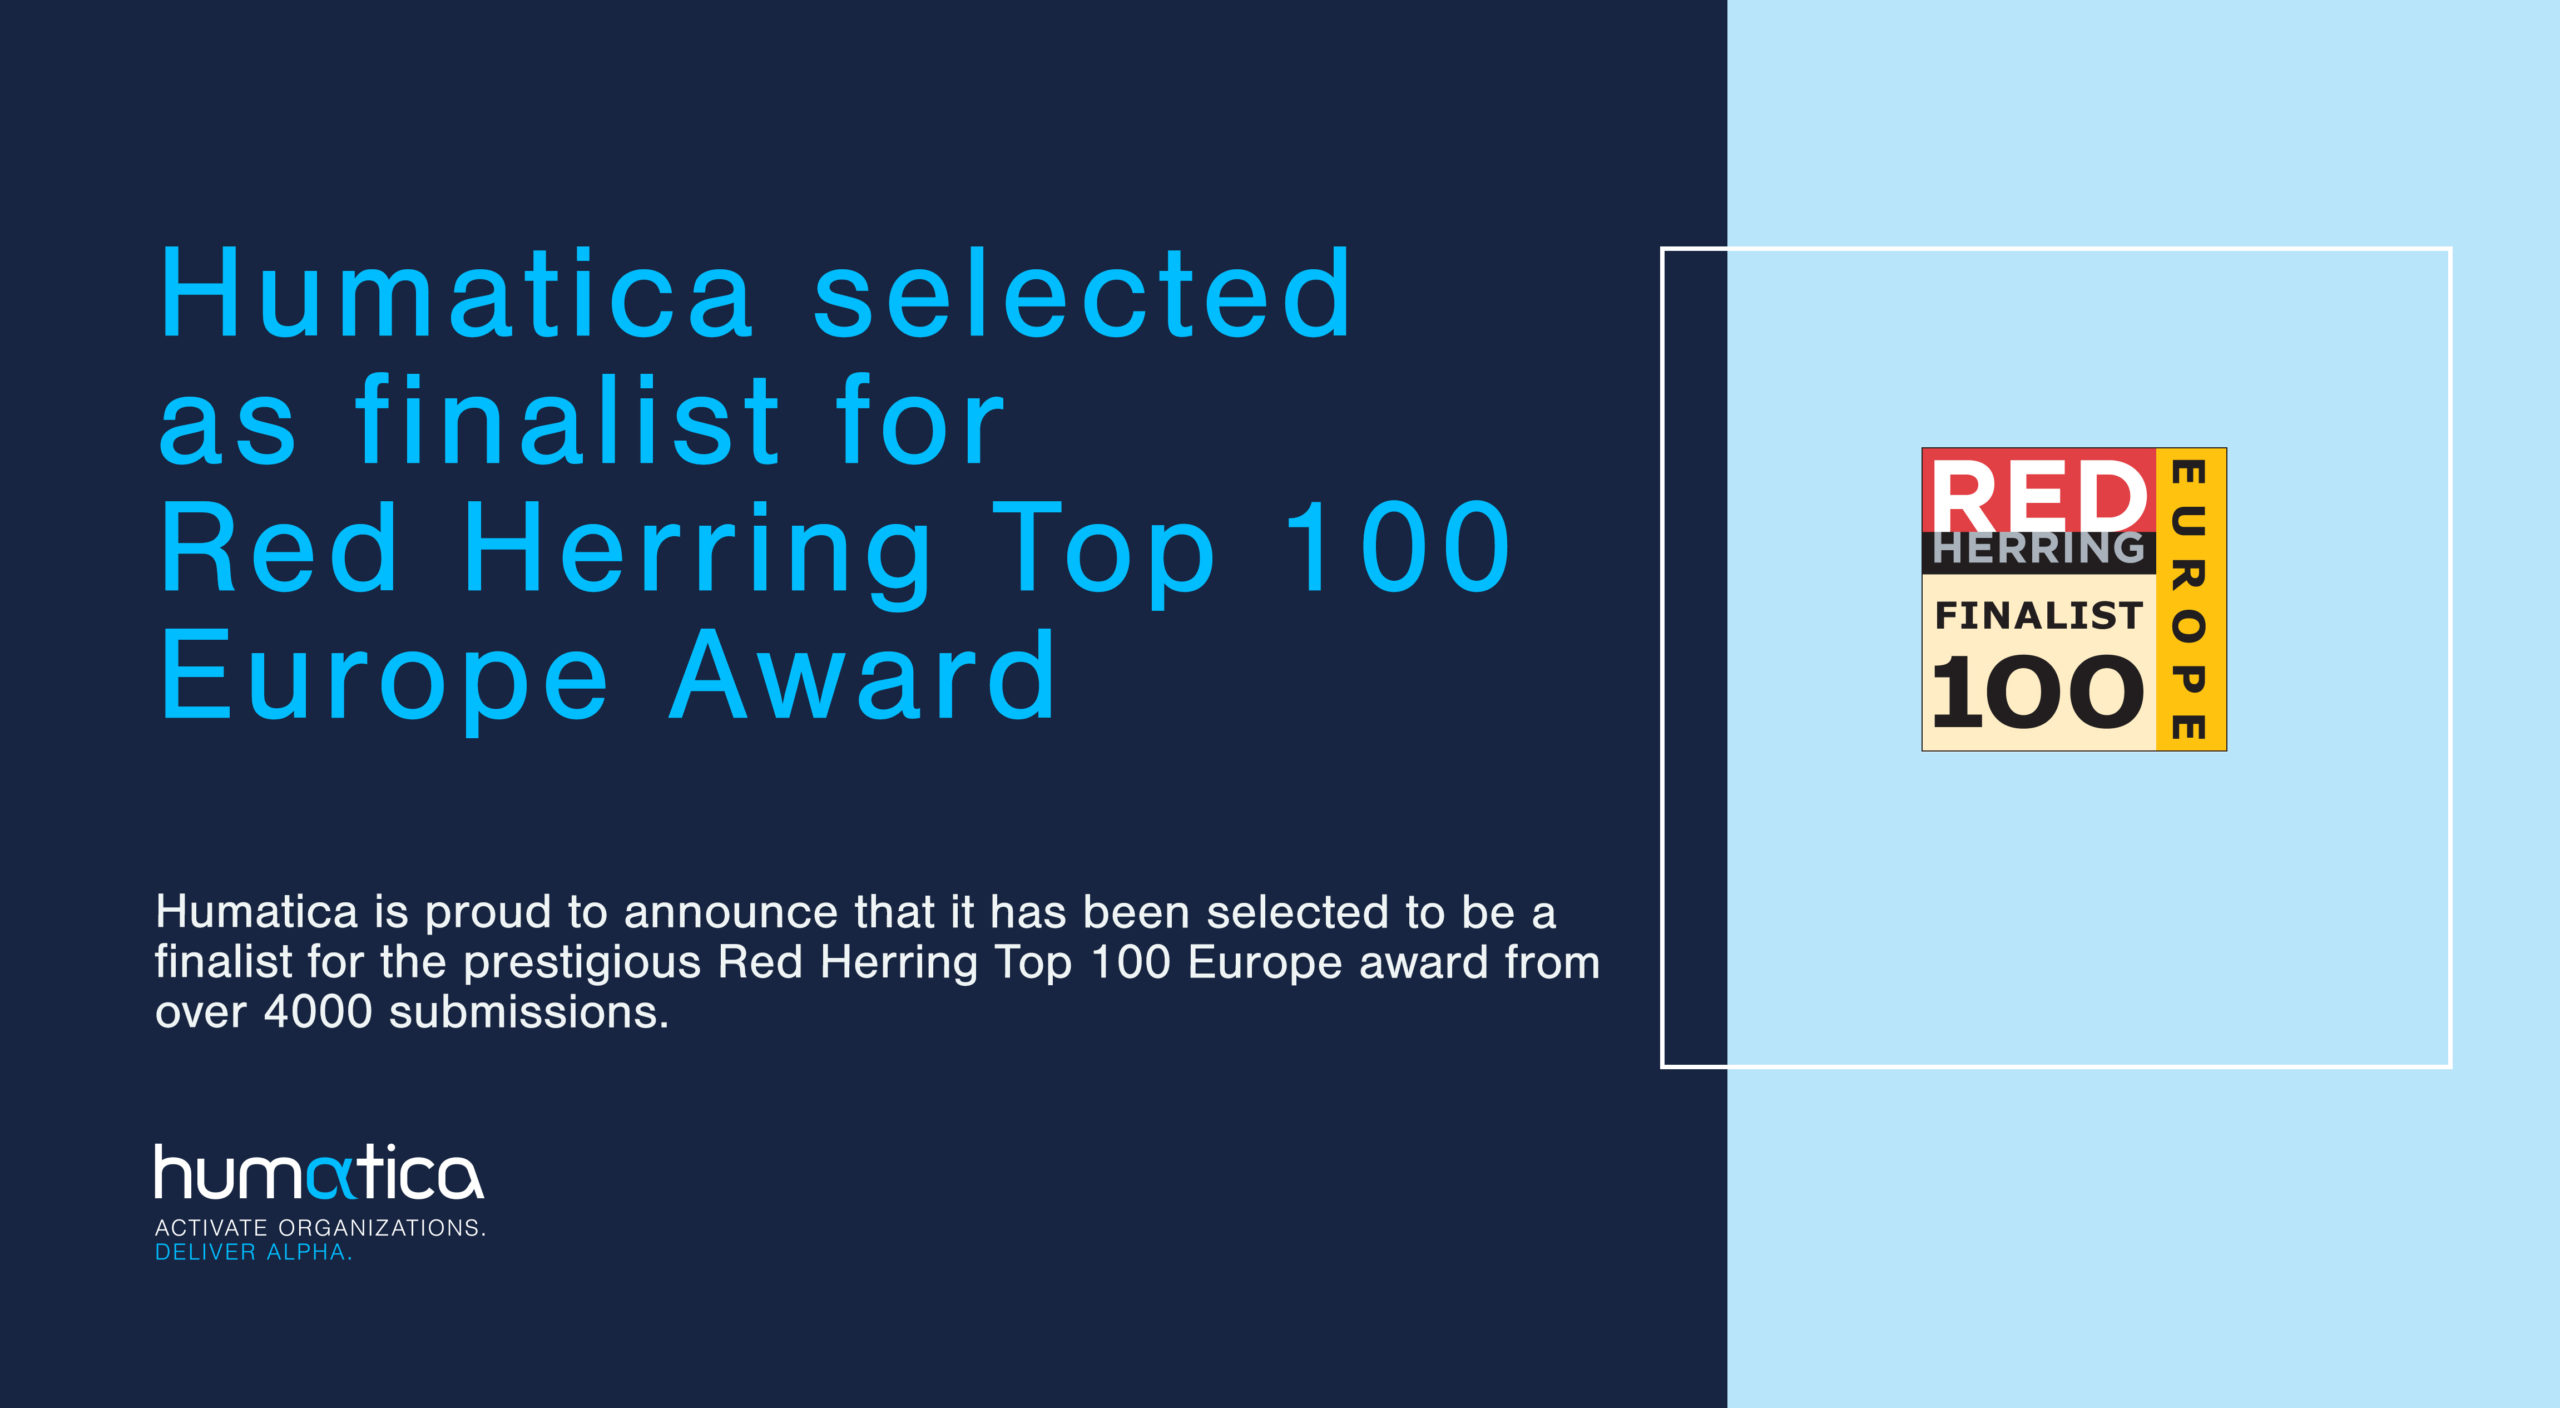 Humatica is proud to be a finalist for the Red Herring Europe 2021 Awards